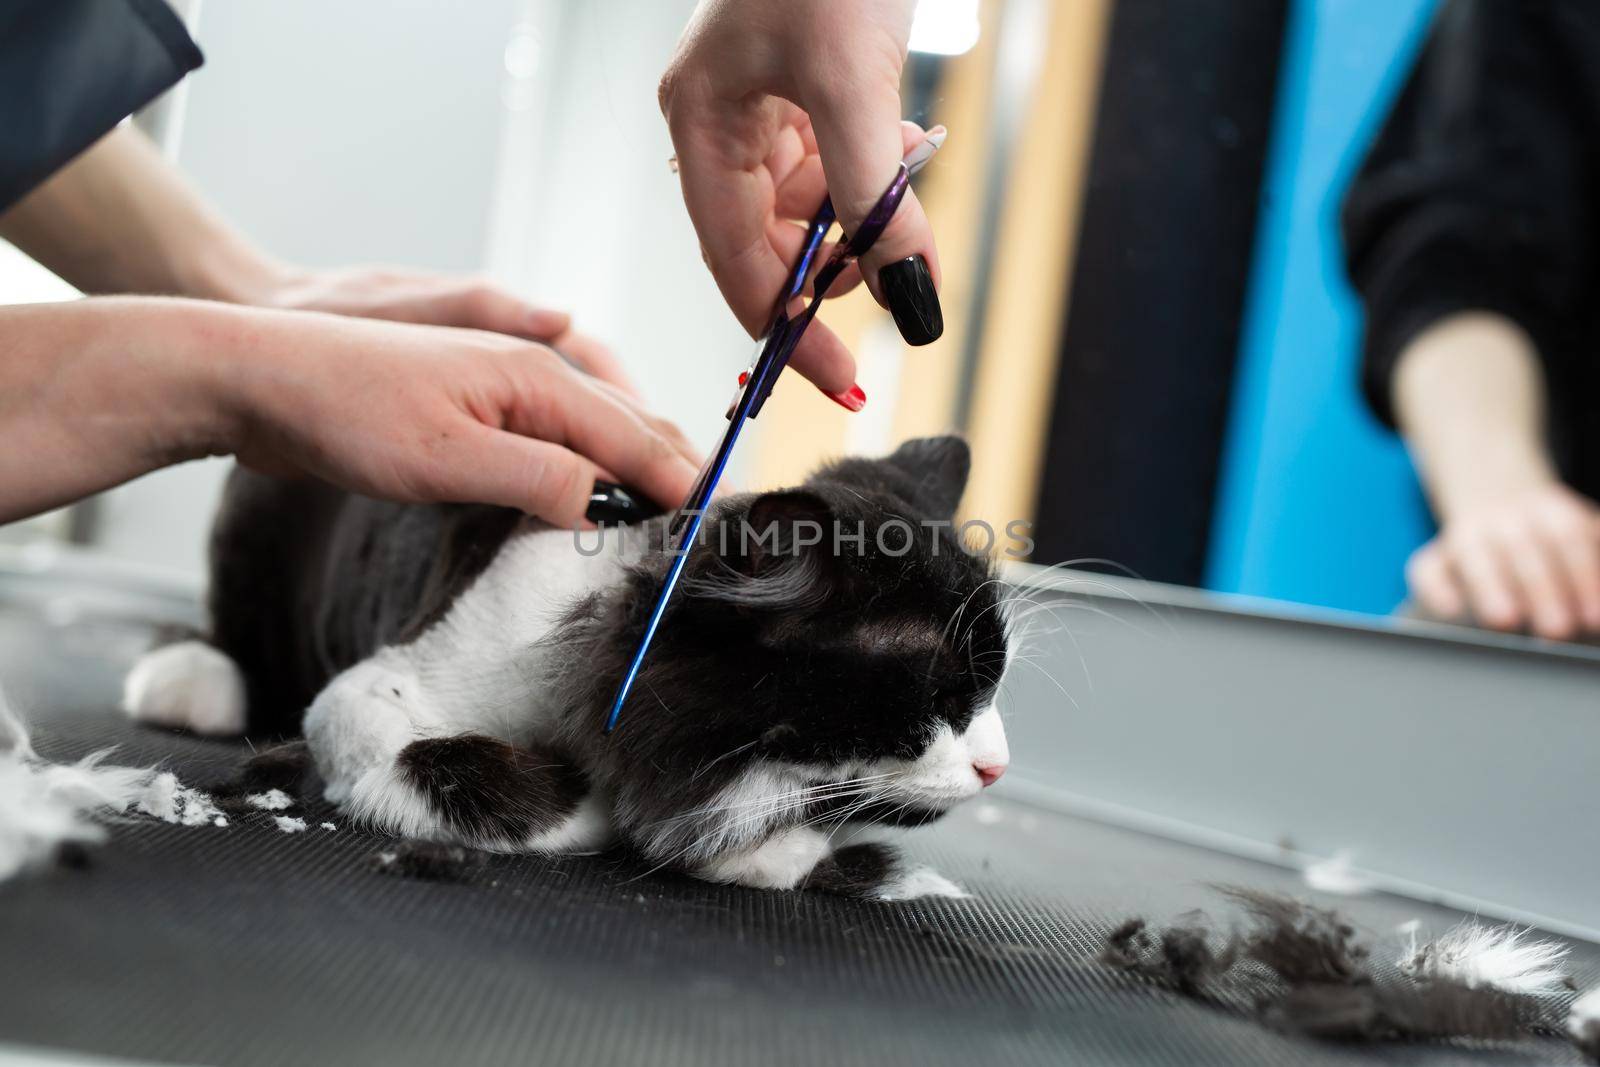 Veterinarian is shearing a cat with scissors in a pet beauty salon. A female Barber shaves a black and white cat. Grooming animals.